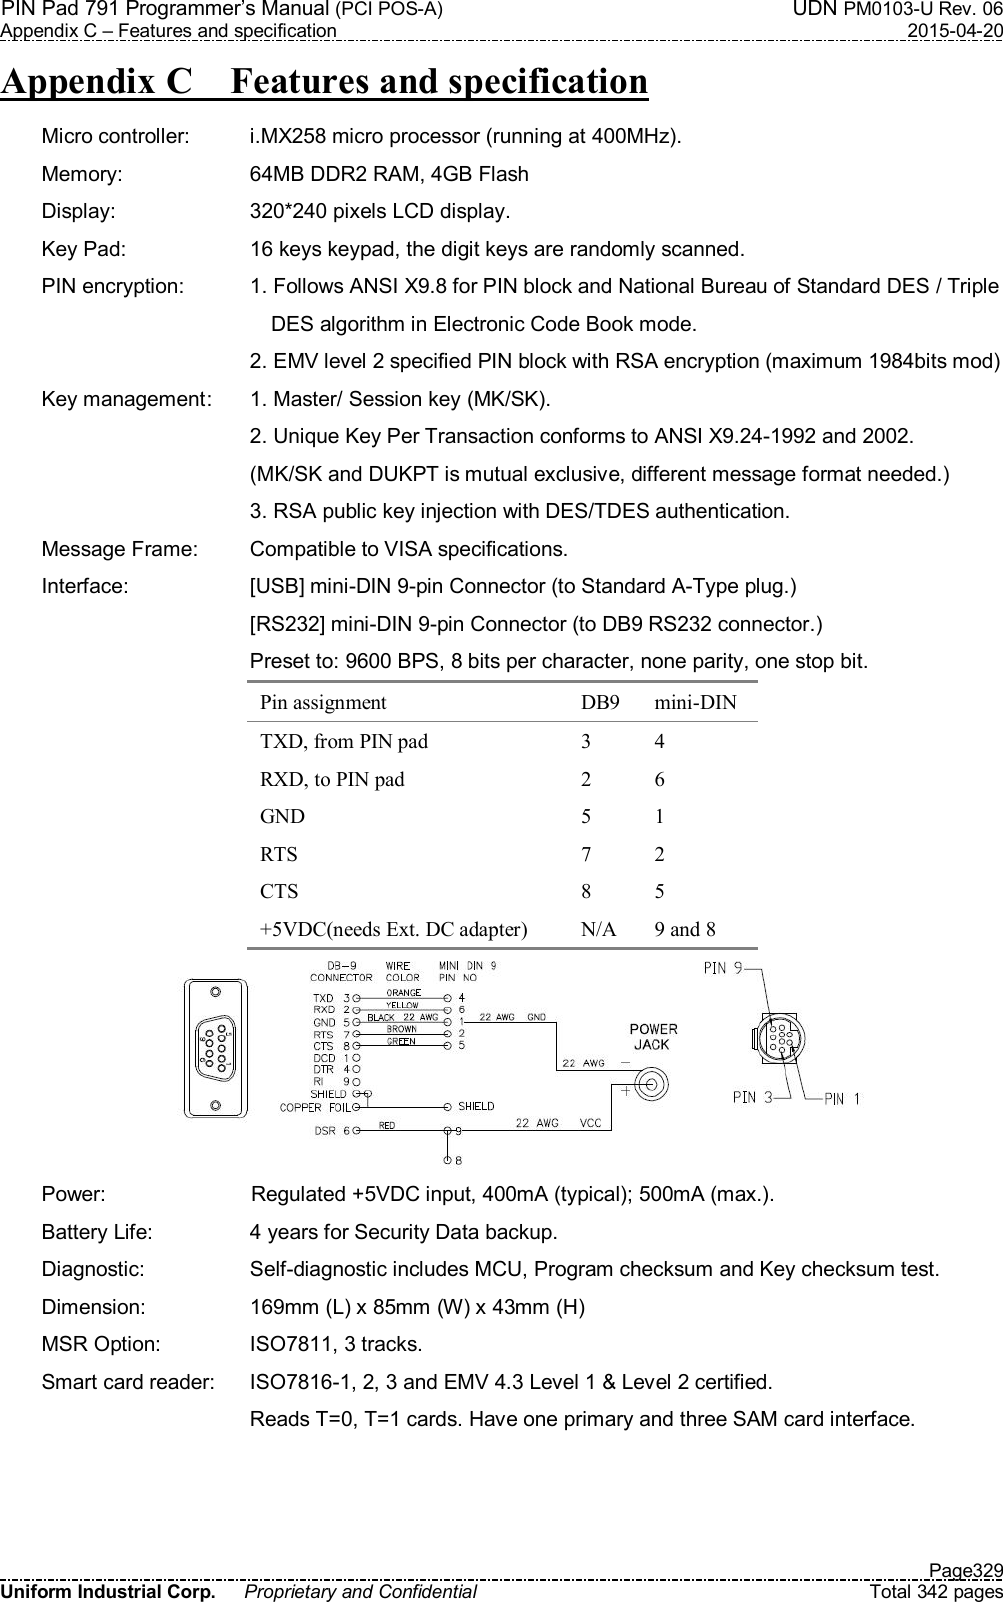 PIN Pad 791 Programmer’s Manual (PCI POS-A)  UDN PM0103-U Rev. 06 Appendix C – Features and specification  2015-04-20   Page329 Uniform Industrial Corp.  Proprietary and Confidential  Total 342 pages Appendix C    Features and specification Micro controller:    i.MX258 micro processor (running at 400MHz). Memory:    64MB DDR2 RAM, 4GB Flash Display:    320*240 pixels LCD display. Key Pad:    16 keys keypad, the digit keys are randomly scanned. PIN encryption:    1. Follows ANSI X9.8 for PIN block and National Bureau of Standard DES / Triple         DES algorithm in Electronic Code Book mode.   2. EMV level 2 specified PIN block with RSA encryption (maximum 1984bits mod) Key management :  1. Master/ Session key (MK/SK).   2. Unique Key Per Transaction conforms to ANSI X9.24-1992 and 2002.     (MK/SK and DUKPT is mutual exclusive, different message format needed.)   3. RSA public key injection with DES/TDES authentication. Message Frame:    Compatible to VISA specifications. Interface:    [USB] mini-DIN 9-pin Connector (to Standard A-Type plug.)   [RS232] mini-DIN 9-pin Connector (to DB9 RS232 connector.)   Preset to: 9600 BPS, 8 bits per character, none parity, one stop bit. Pin assignment  DB9  mini-DIN TXD, from PIN pad  3  4 RXD, to PIN pad  2  6 GND  5  1 RTS  7  2 CTS  8  5 +5VDC(needs Ext. DC adapter)  N/A  9 and 8  Power:  Regulated +5VDC input, 400mA (typical); 500mA (max.). Battery Life:    4 years for Security Data backup. Diagnostic:    Self-diagnostic includes MCU, Program checksum and Key checksum test. Dimension:    169mm (L) x 85mm (W) x 43mm (H) MSR Option:    ISO7811, 3 tracks. Smart card reader:  ISO7816-1, 2, 3 and EMV 4.3 Level 1 &amp; Level 2 certified.   Reads T=0, T=1 cards. Have one primary and three SAM card interface. 